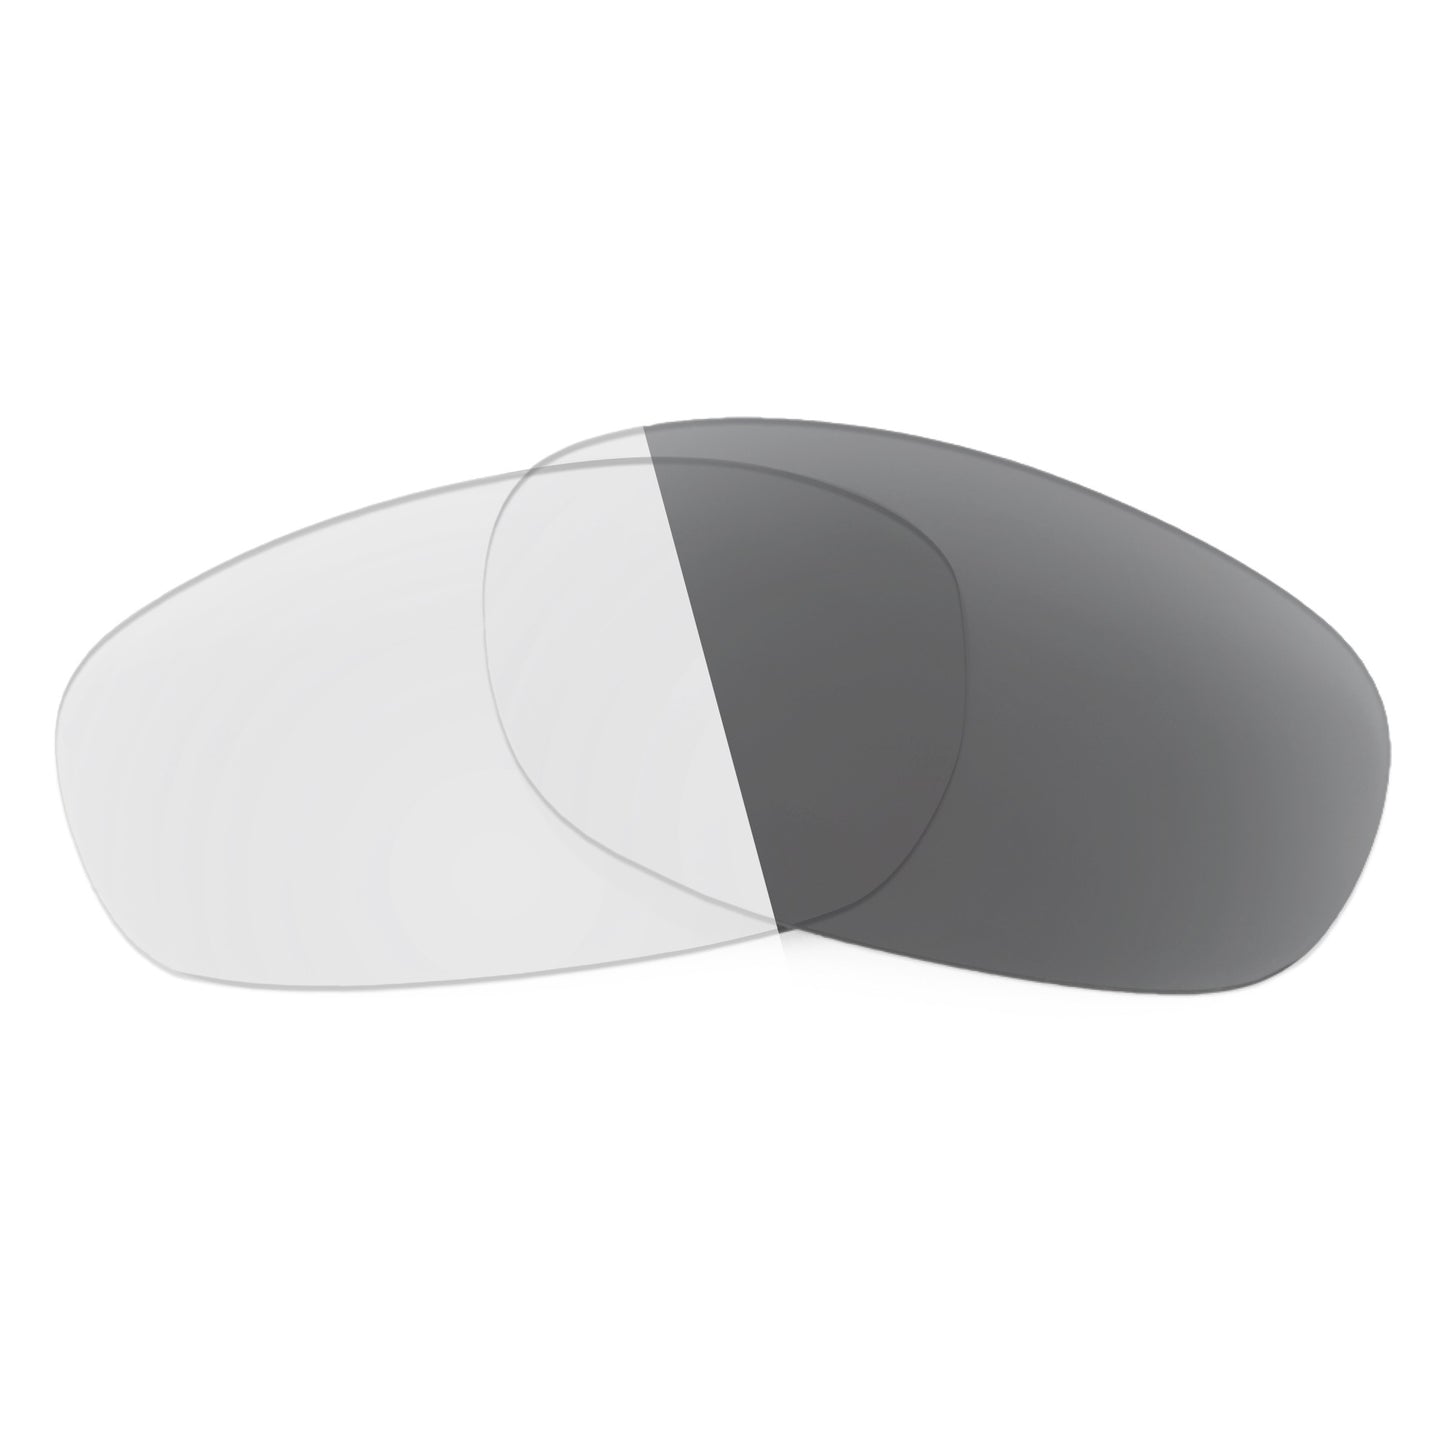 Revant replacement lenses for Ray-Ban New Sleek RB3198 55mm Non-Polarized Adapt Gray Photochromic